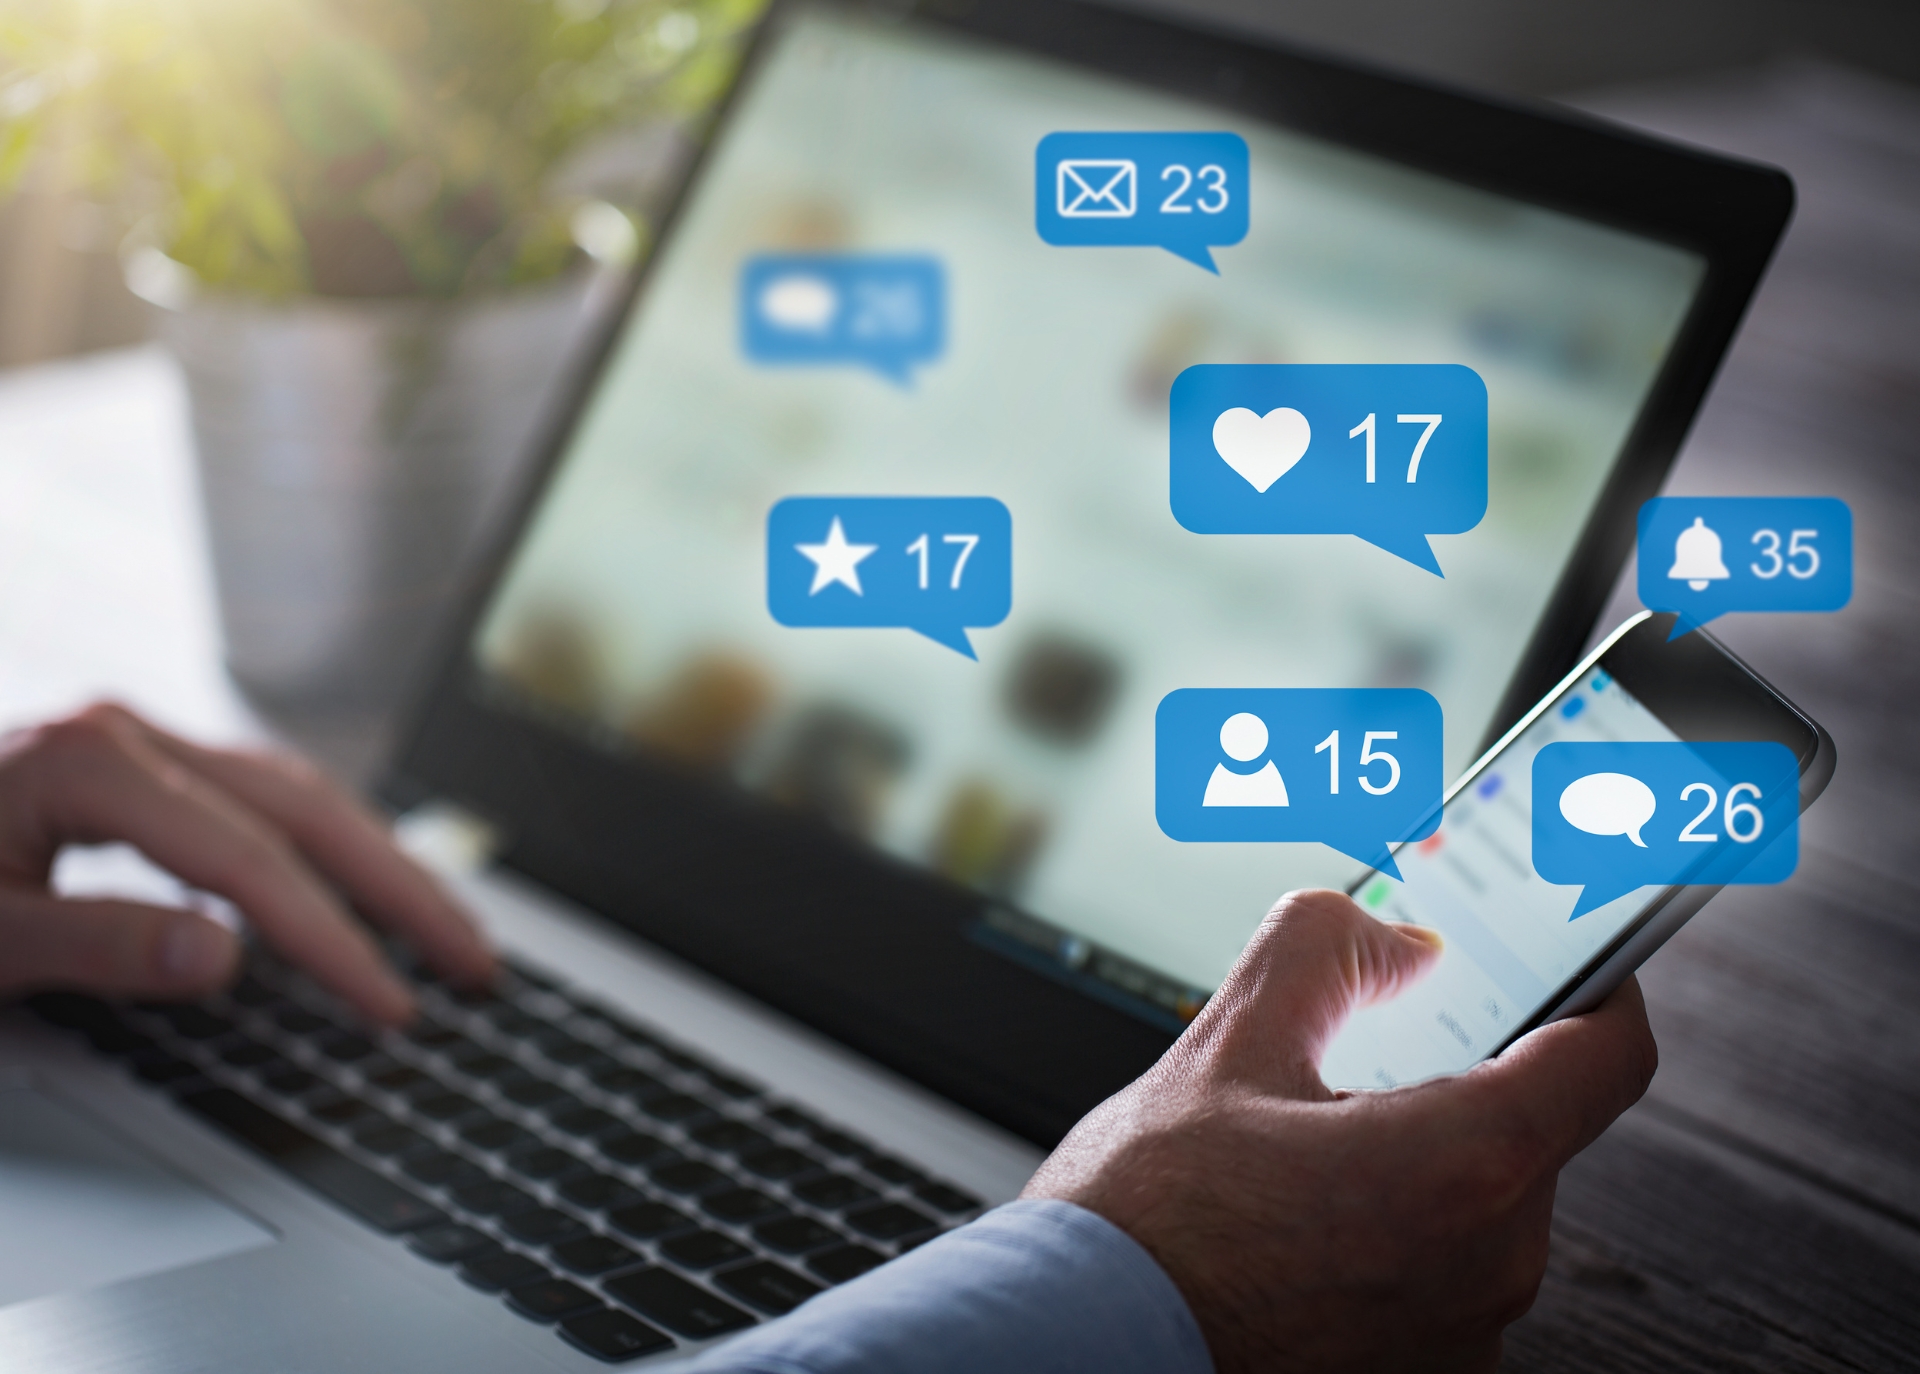 There are many ways to engage with clients on social media